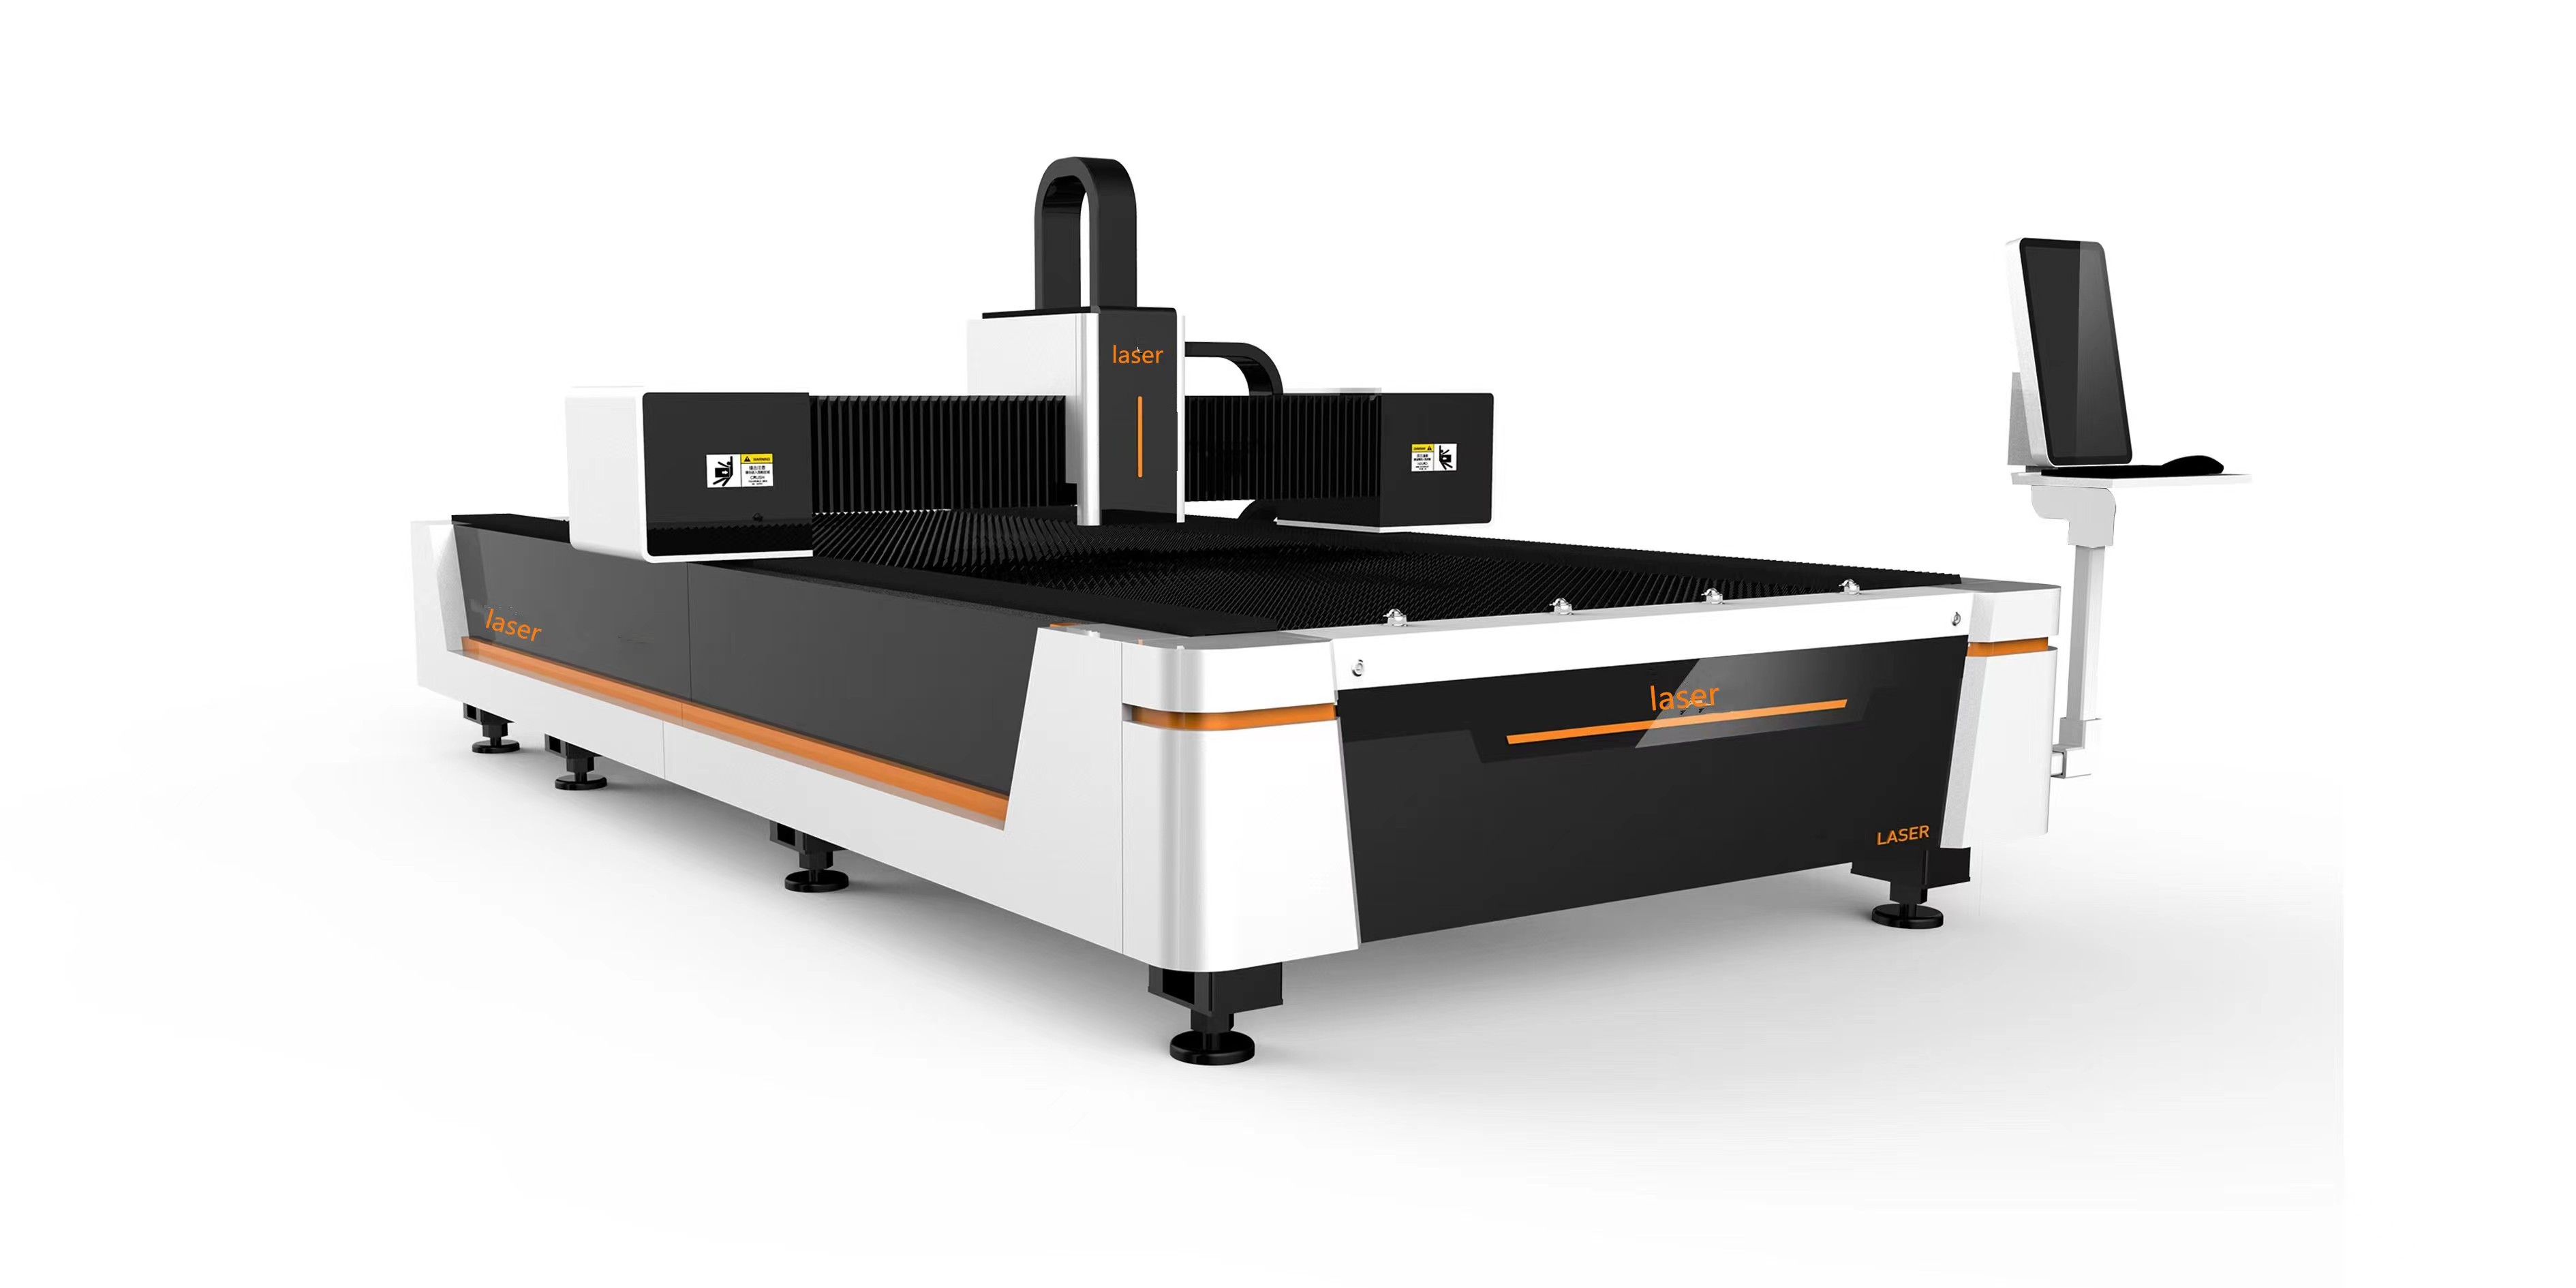 Model 3015 CNC single table fiber laser cutting machine with good quality